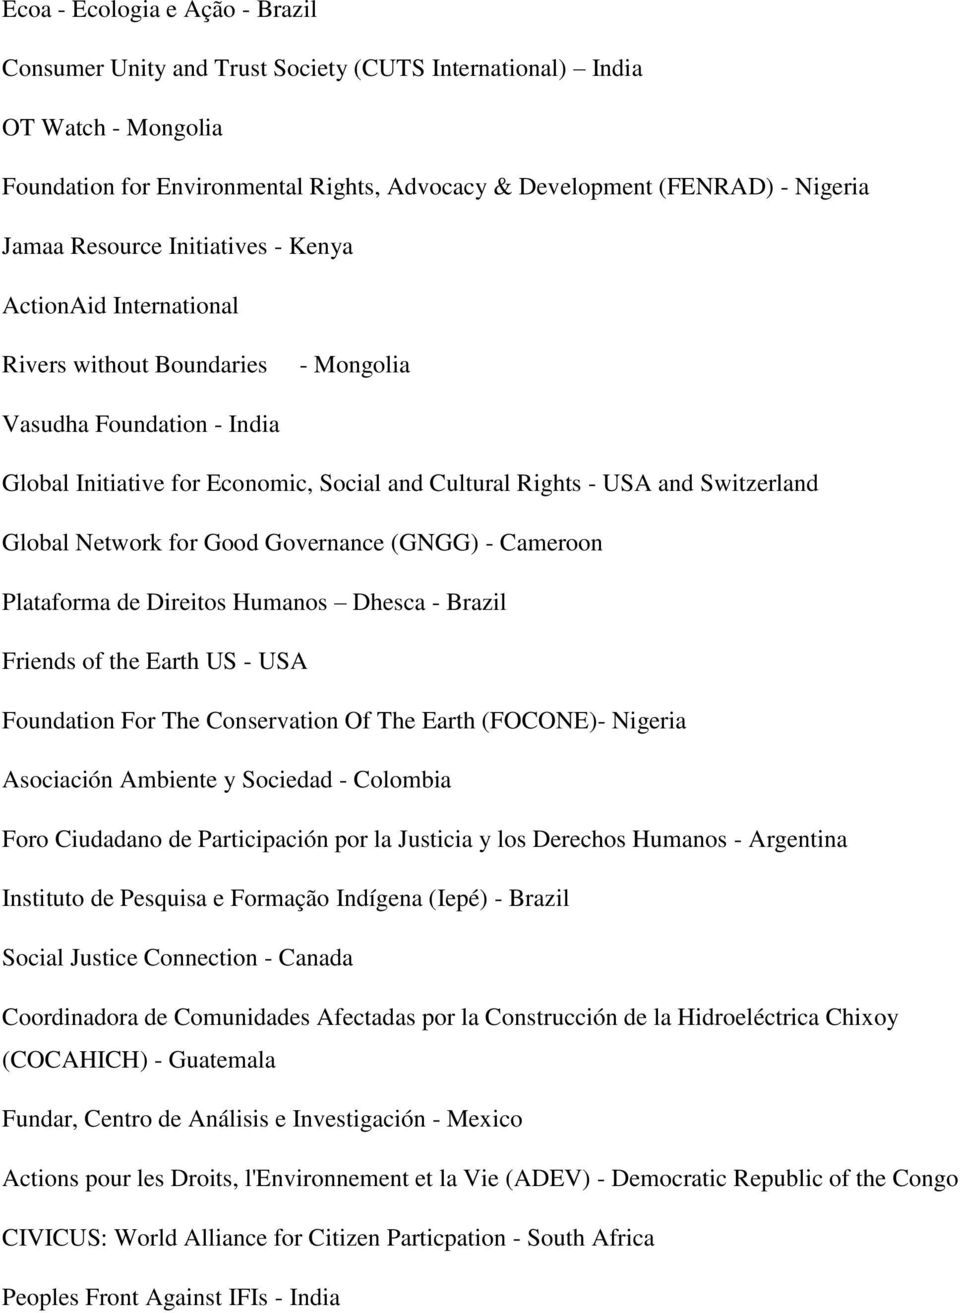 Global Network for Good Governance (GNGG) - Cameroon Plataforma de Direitos Humanos Dhesca - Brazil Friends of the Earth US - USA Foundation For The Conservation Of The Earth (FOCONE)- Nigeria